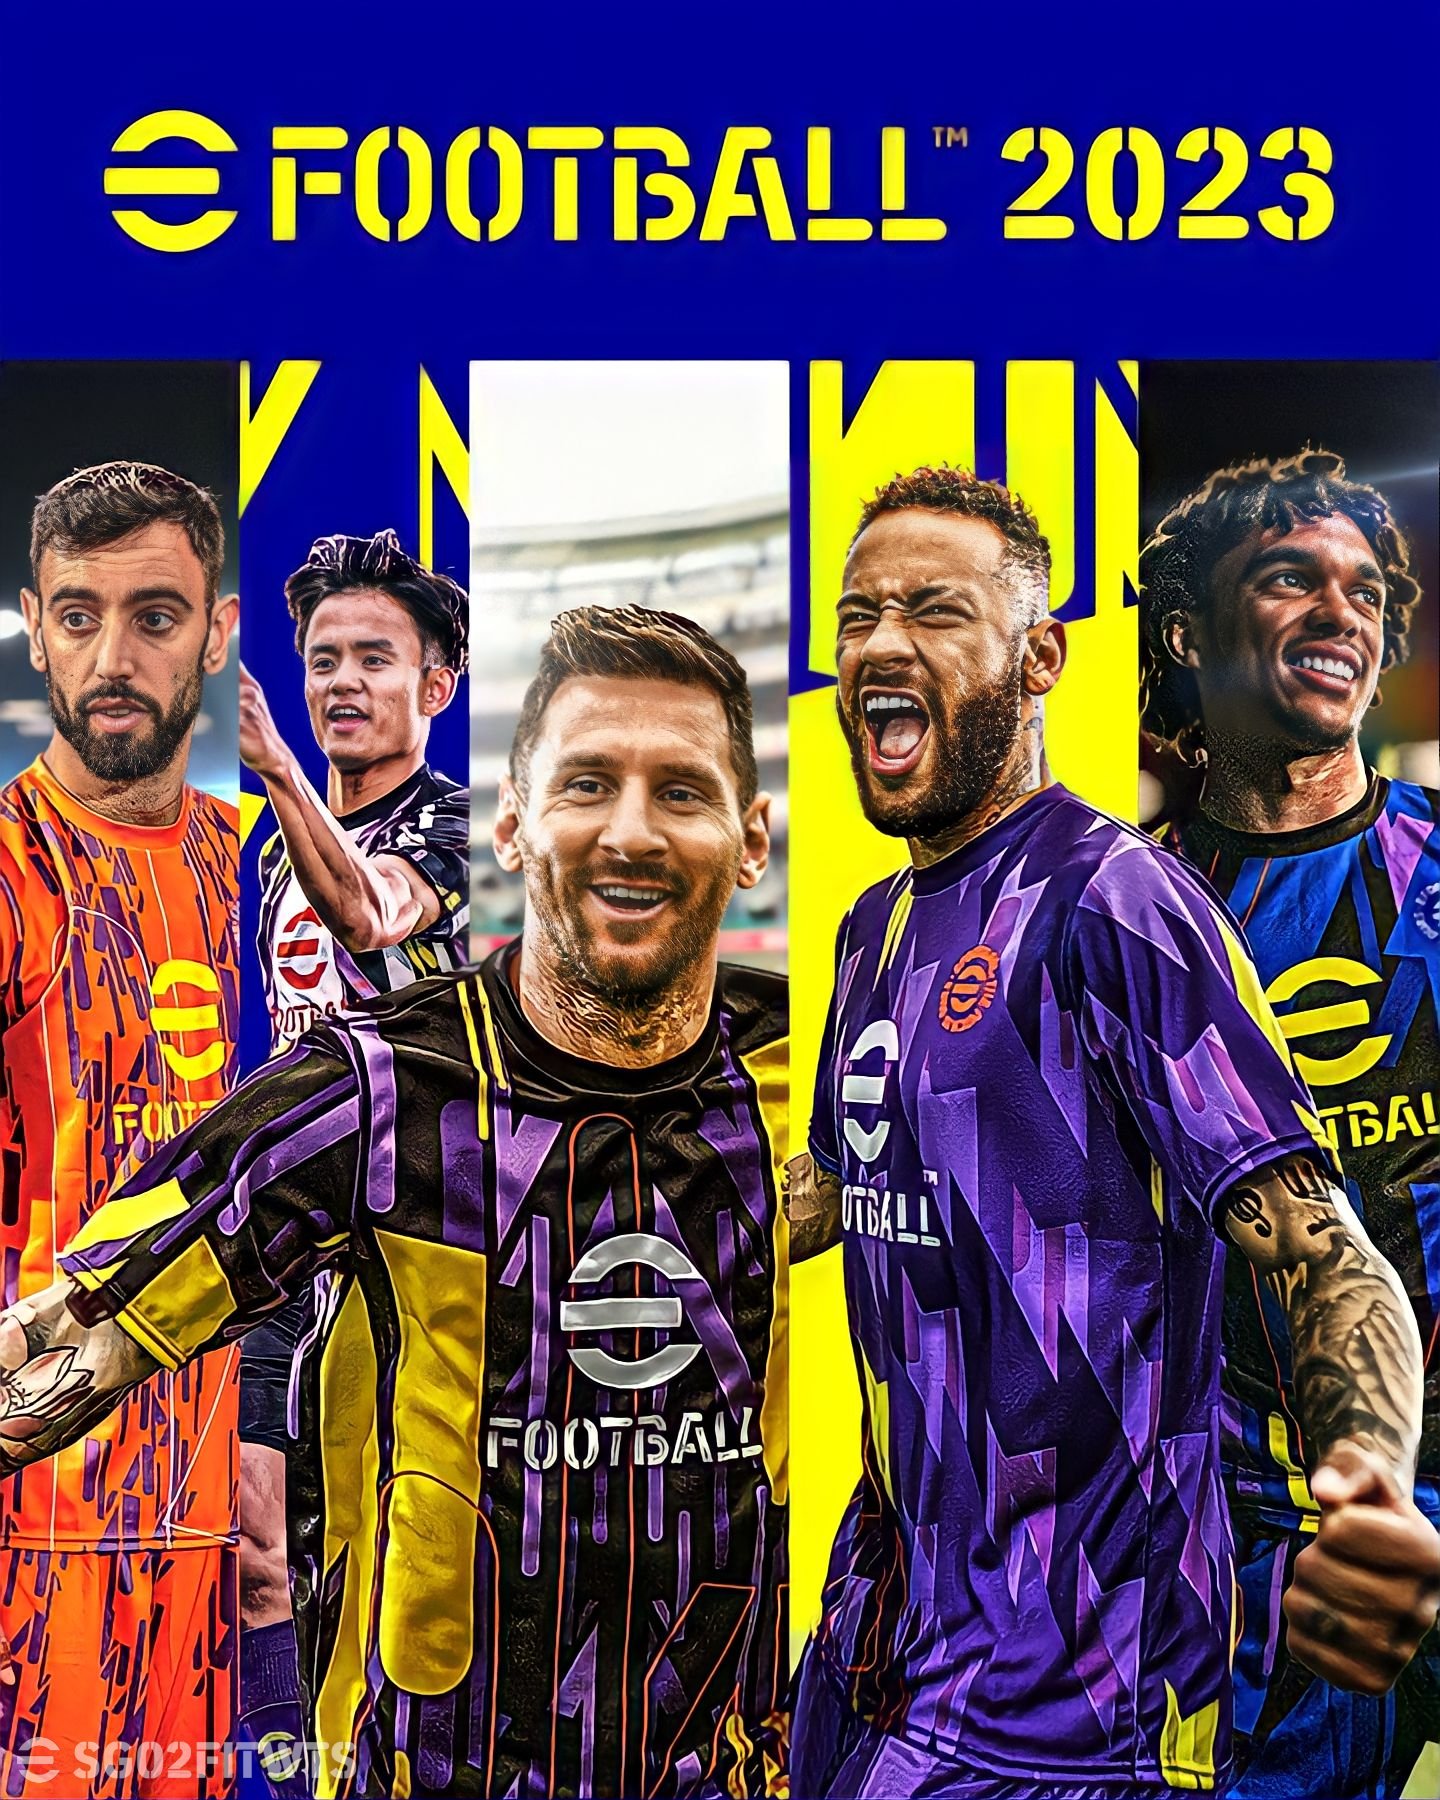 Messi Efootball 2023 Wallpapers Wallpaper Cave